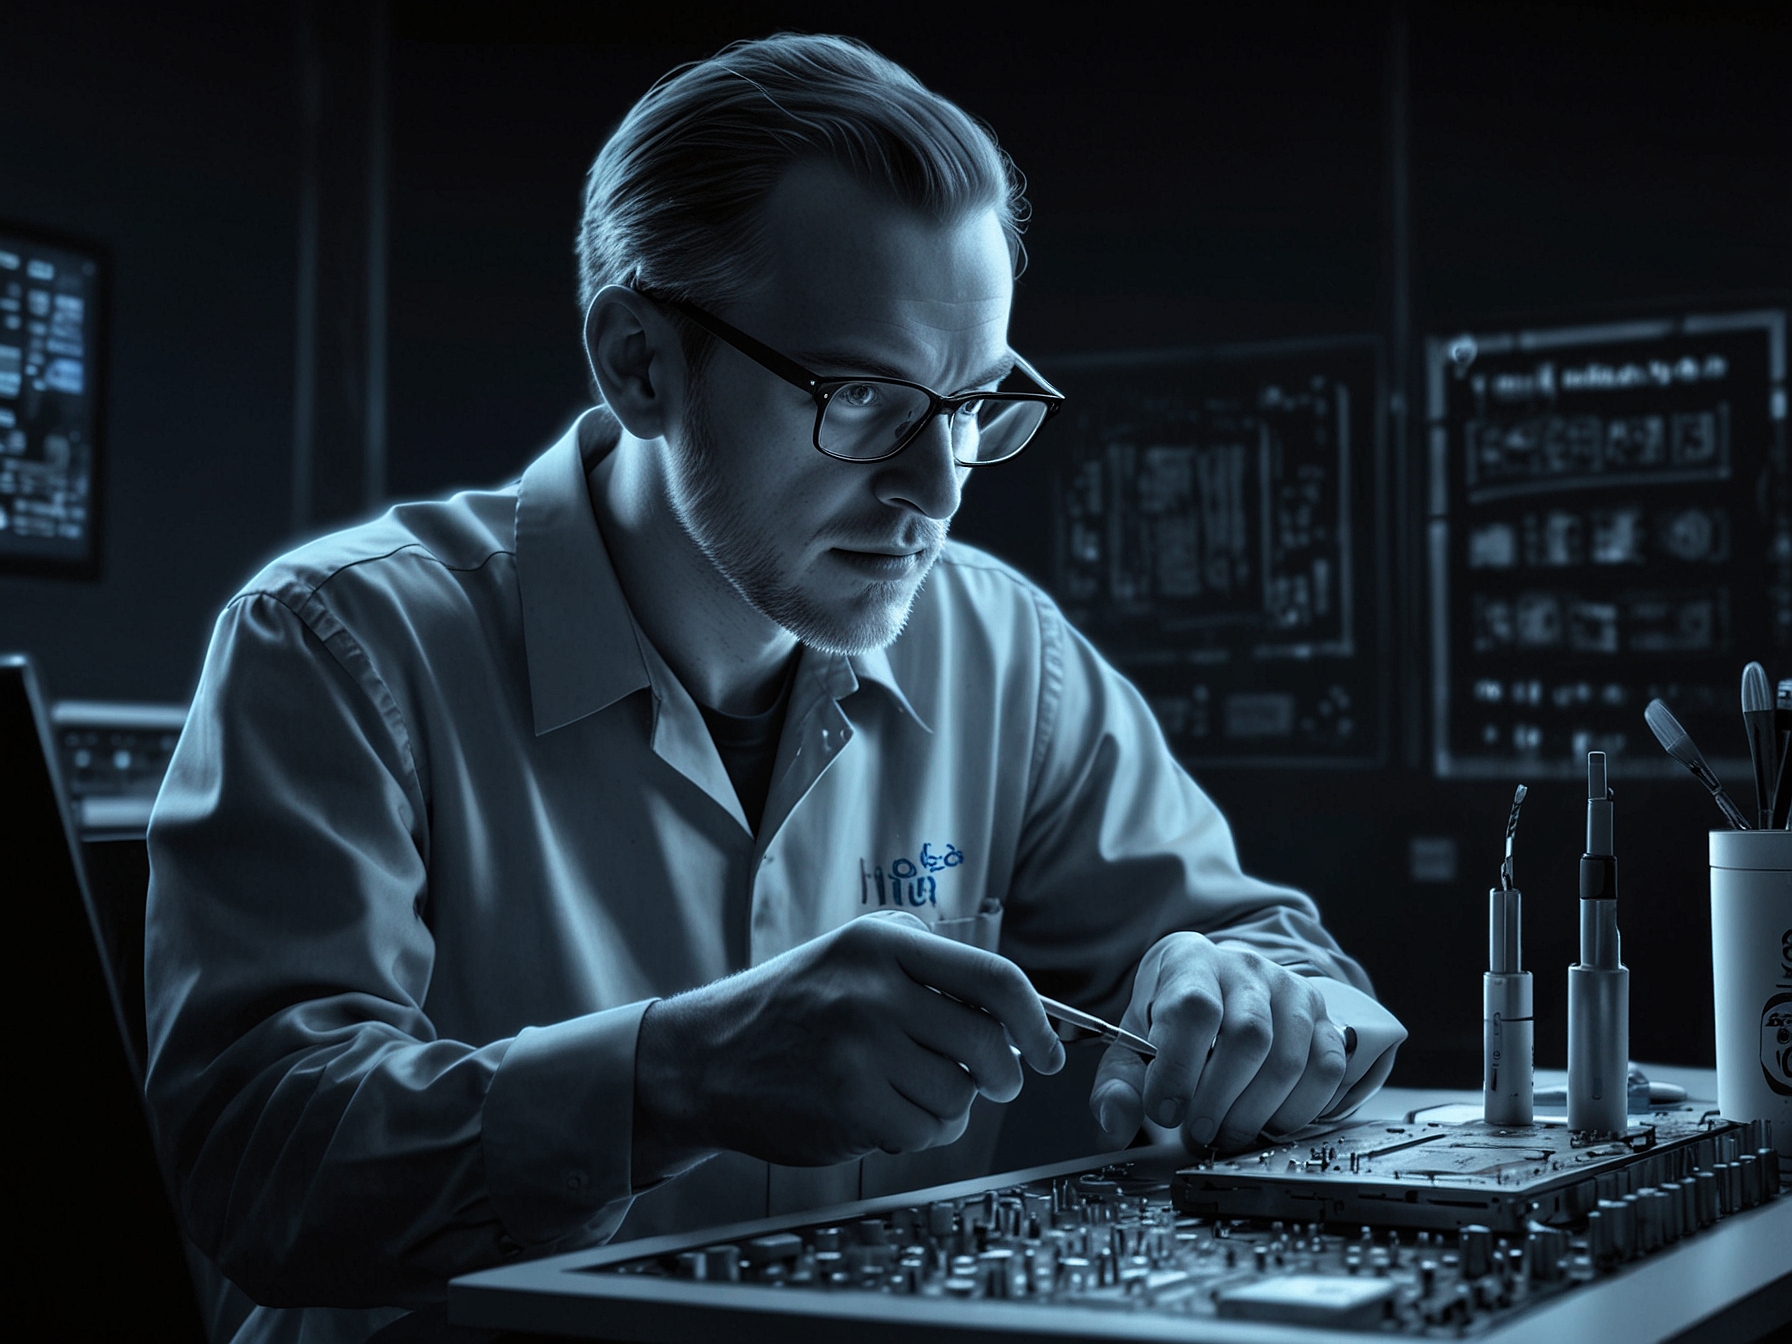 An engineer works on testing Intel's Lunar Lake CPU microchips in a lab setting, highlighting the ongoing development and verification processes for the new processors.